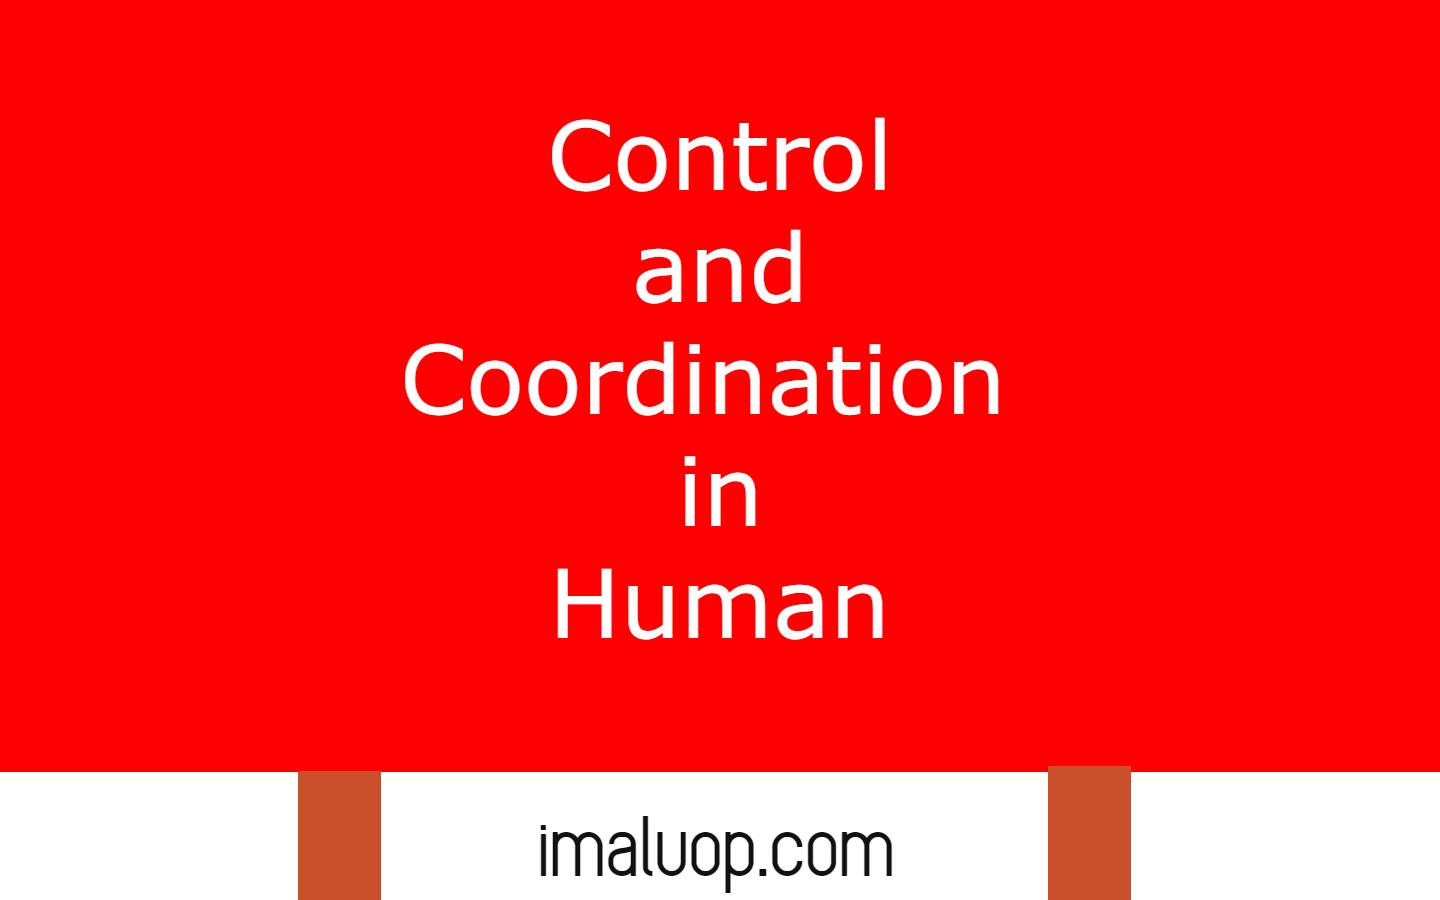 Control and Coordination in Human